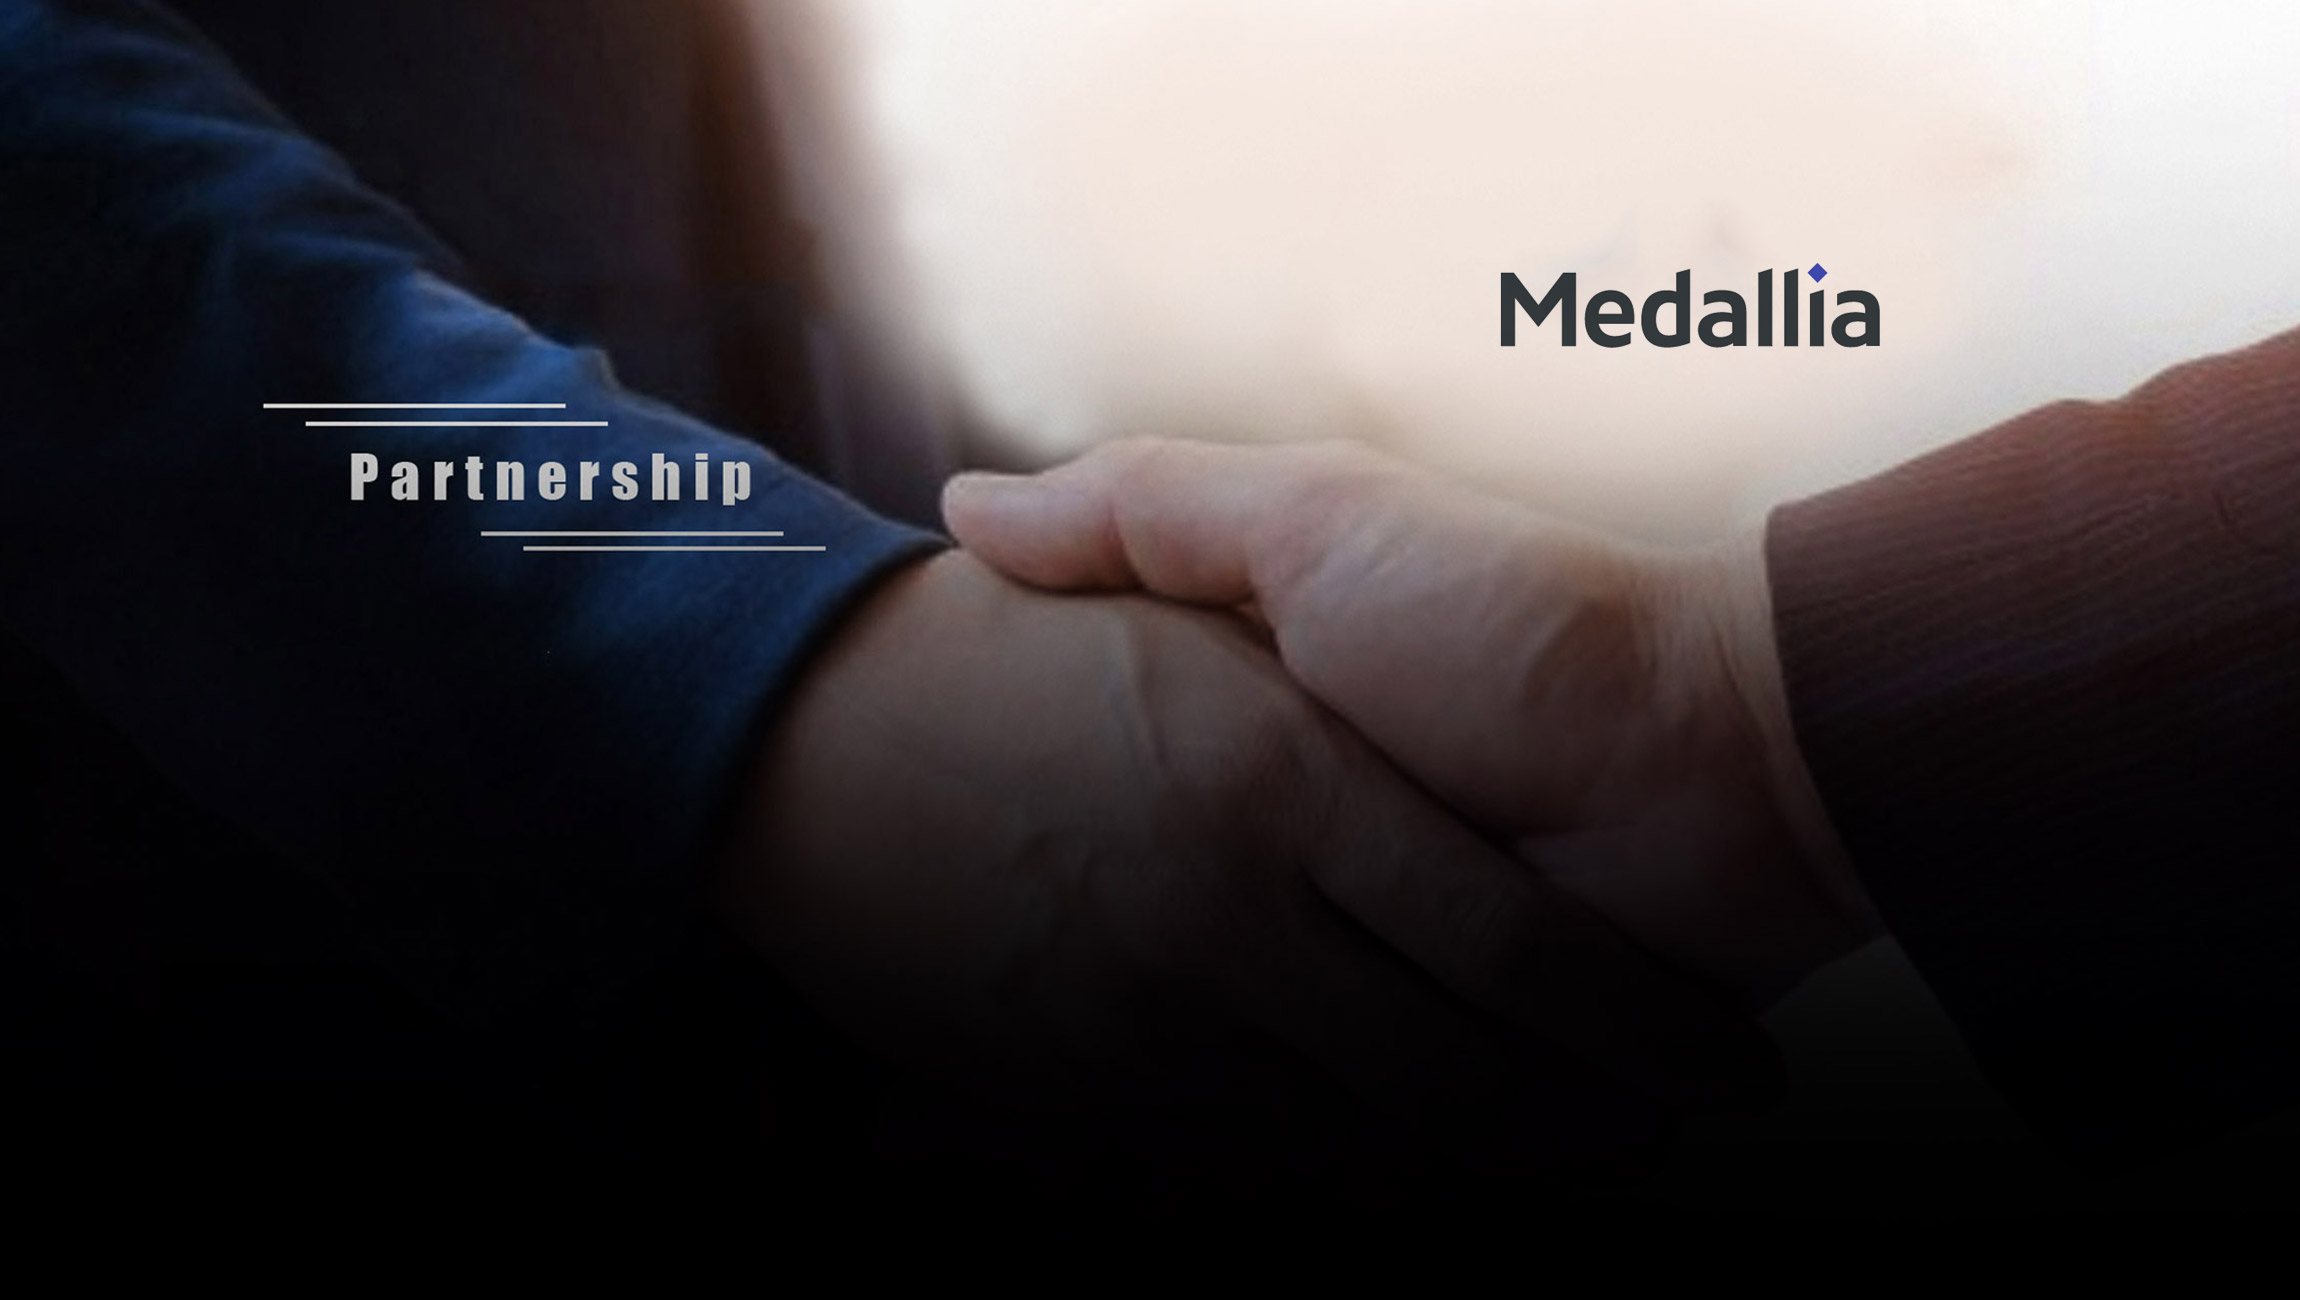 Southwestern Health Resources Chooses Medallia for Experience Management